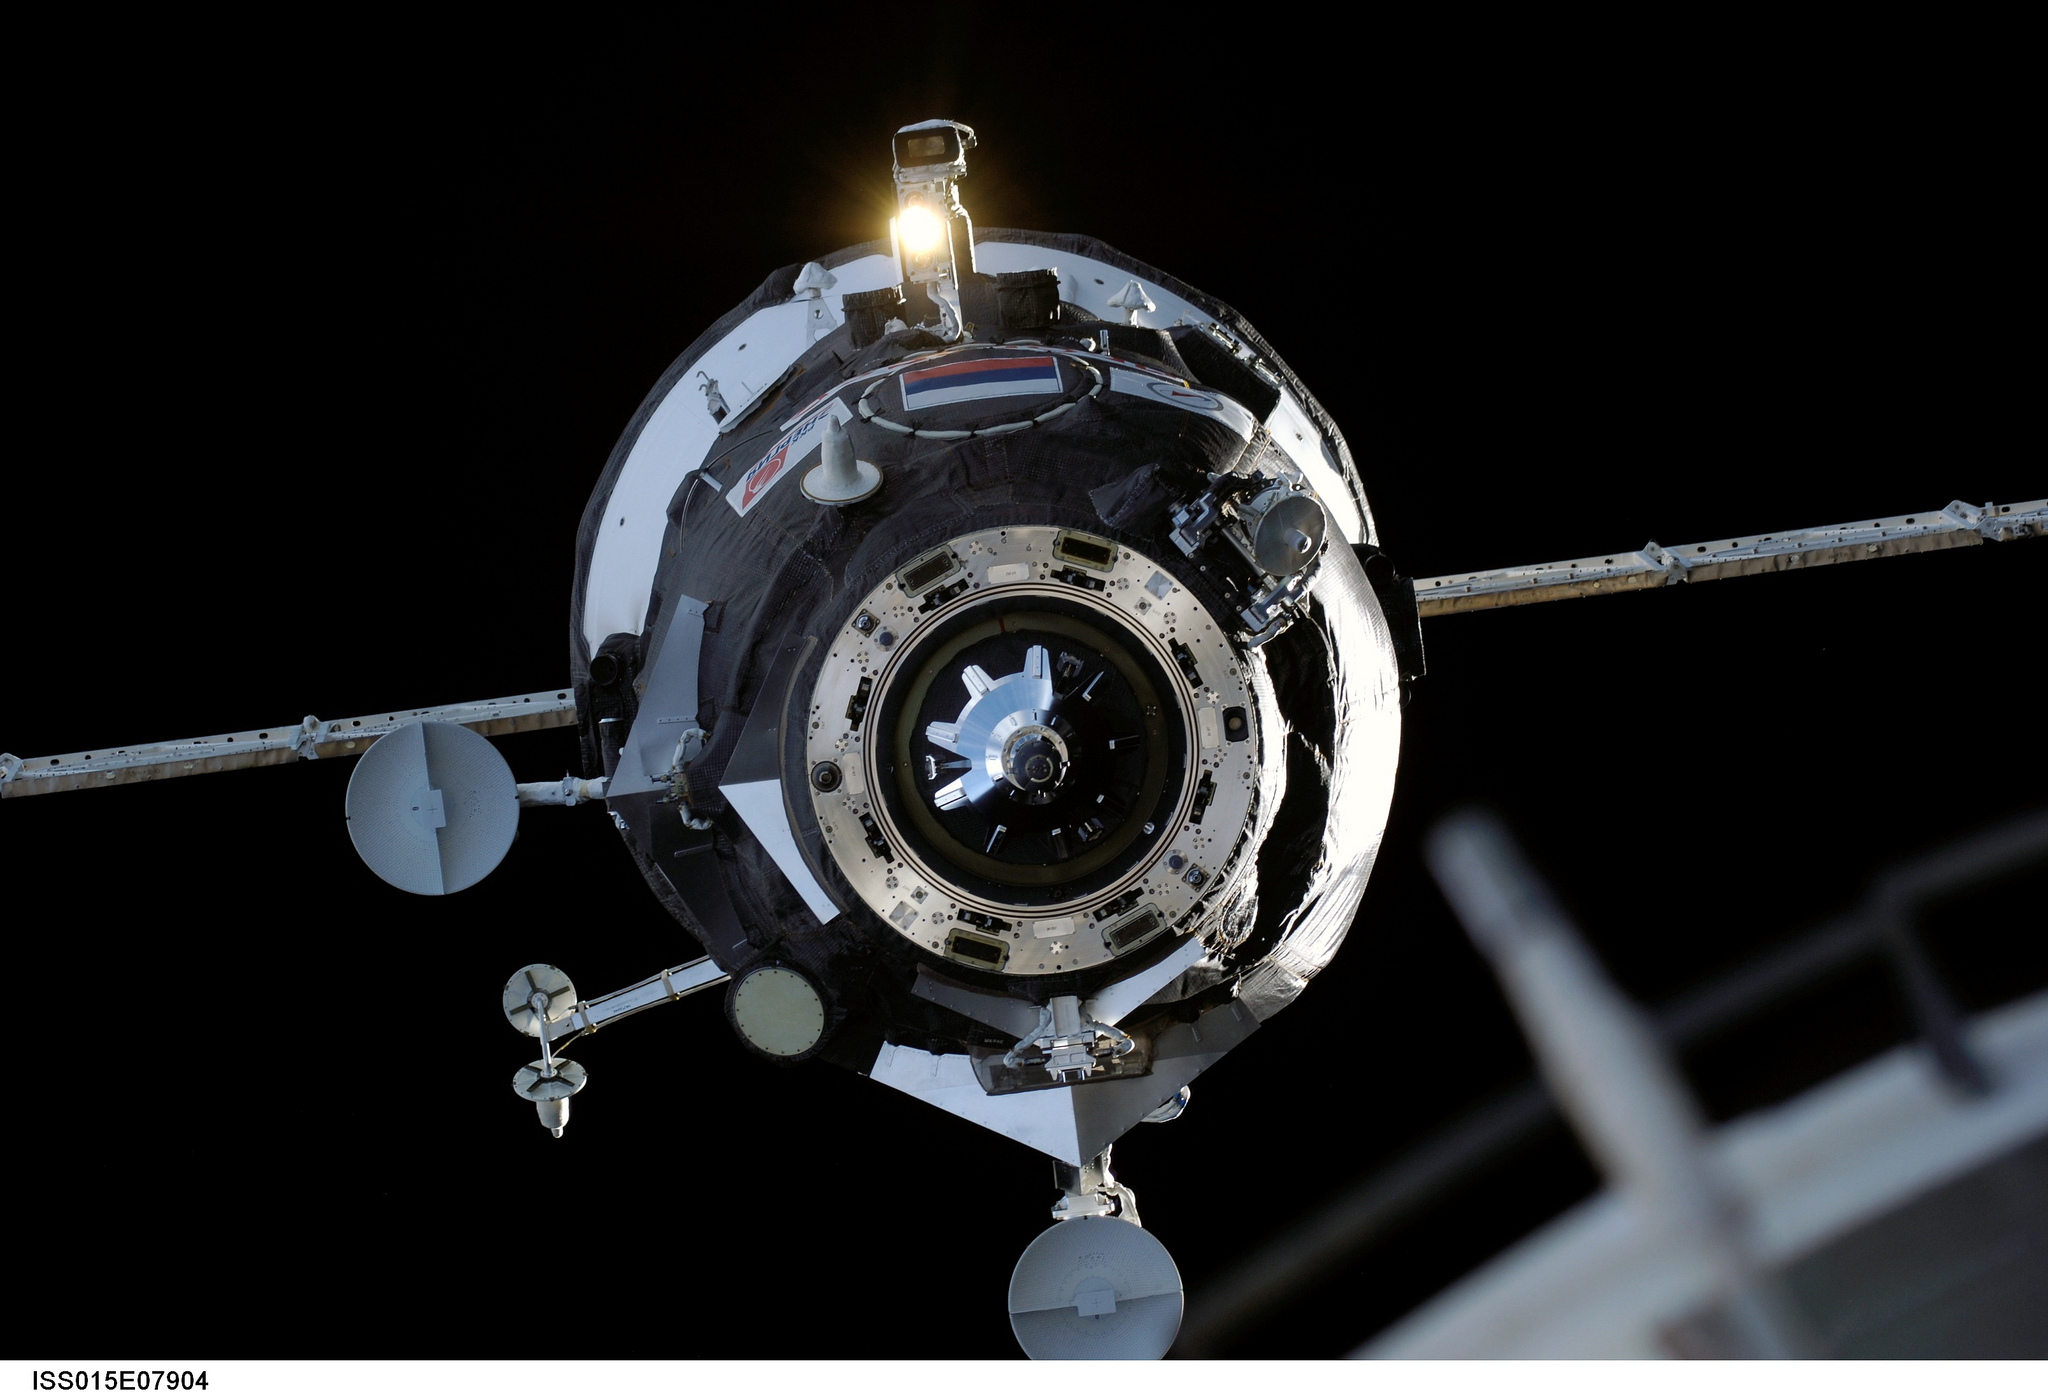 An uncrewed Russian Progress cargo resupply spacecraft approaches the International Space Station